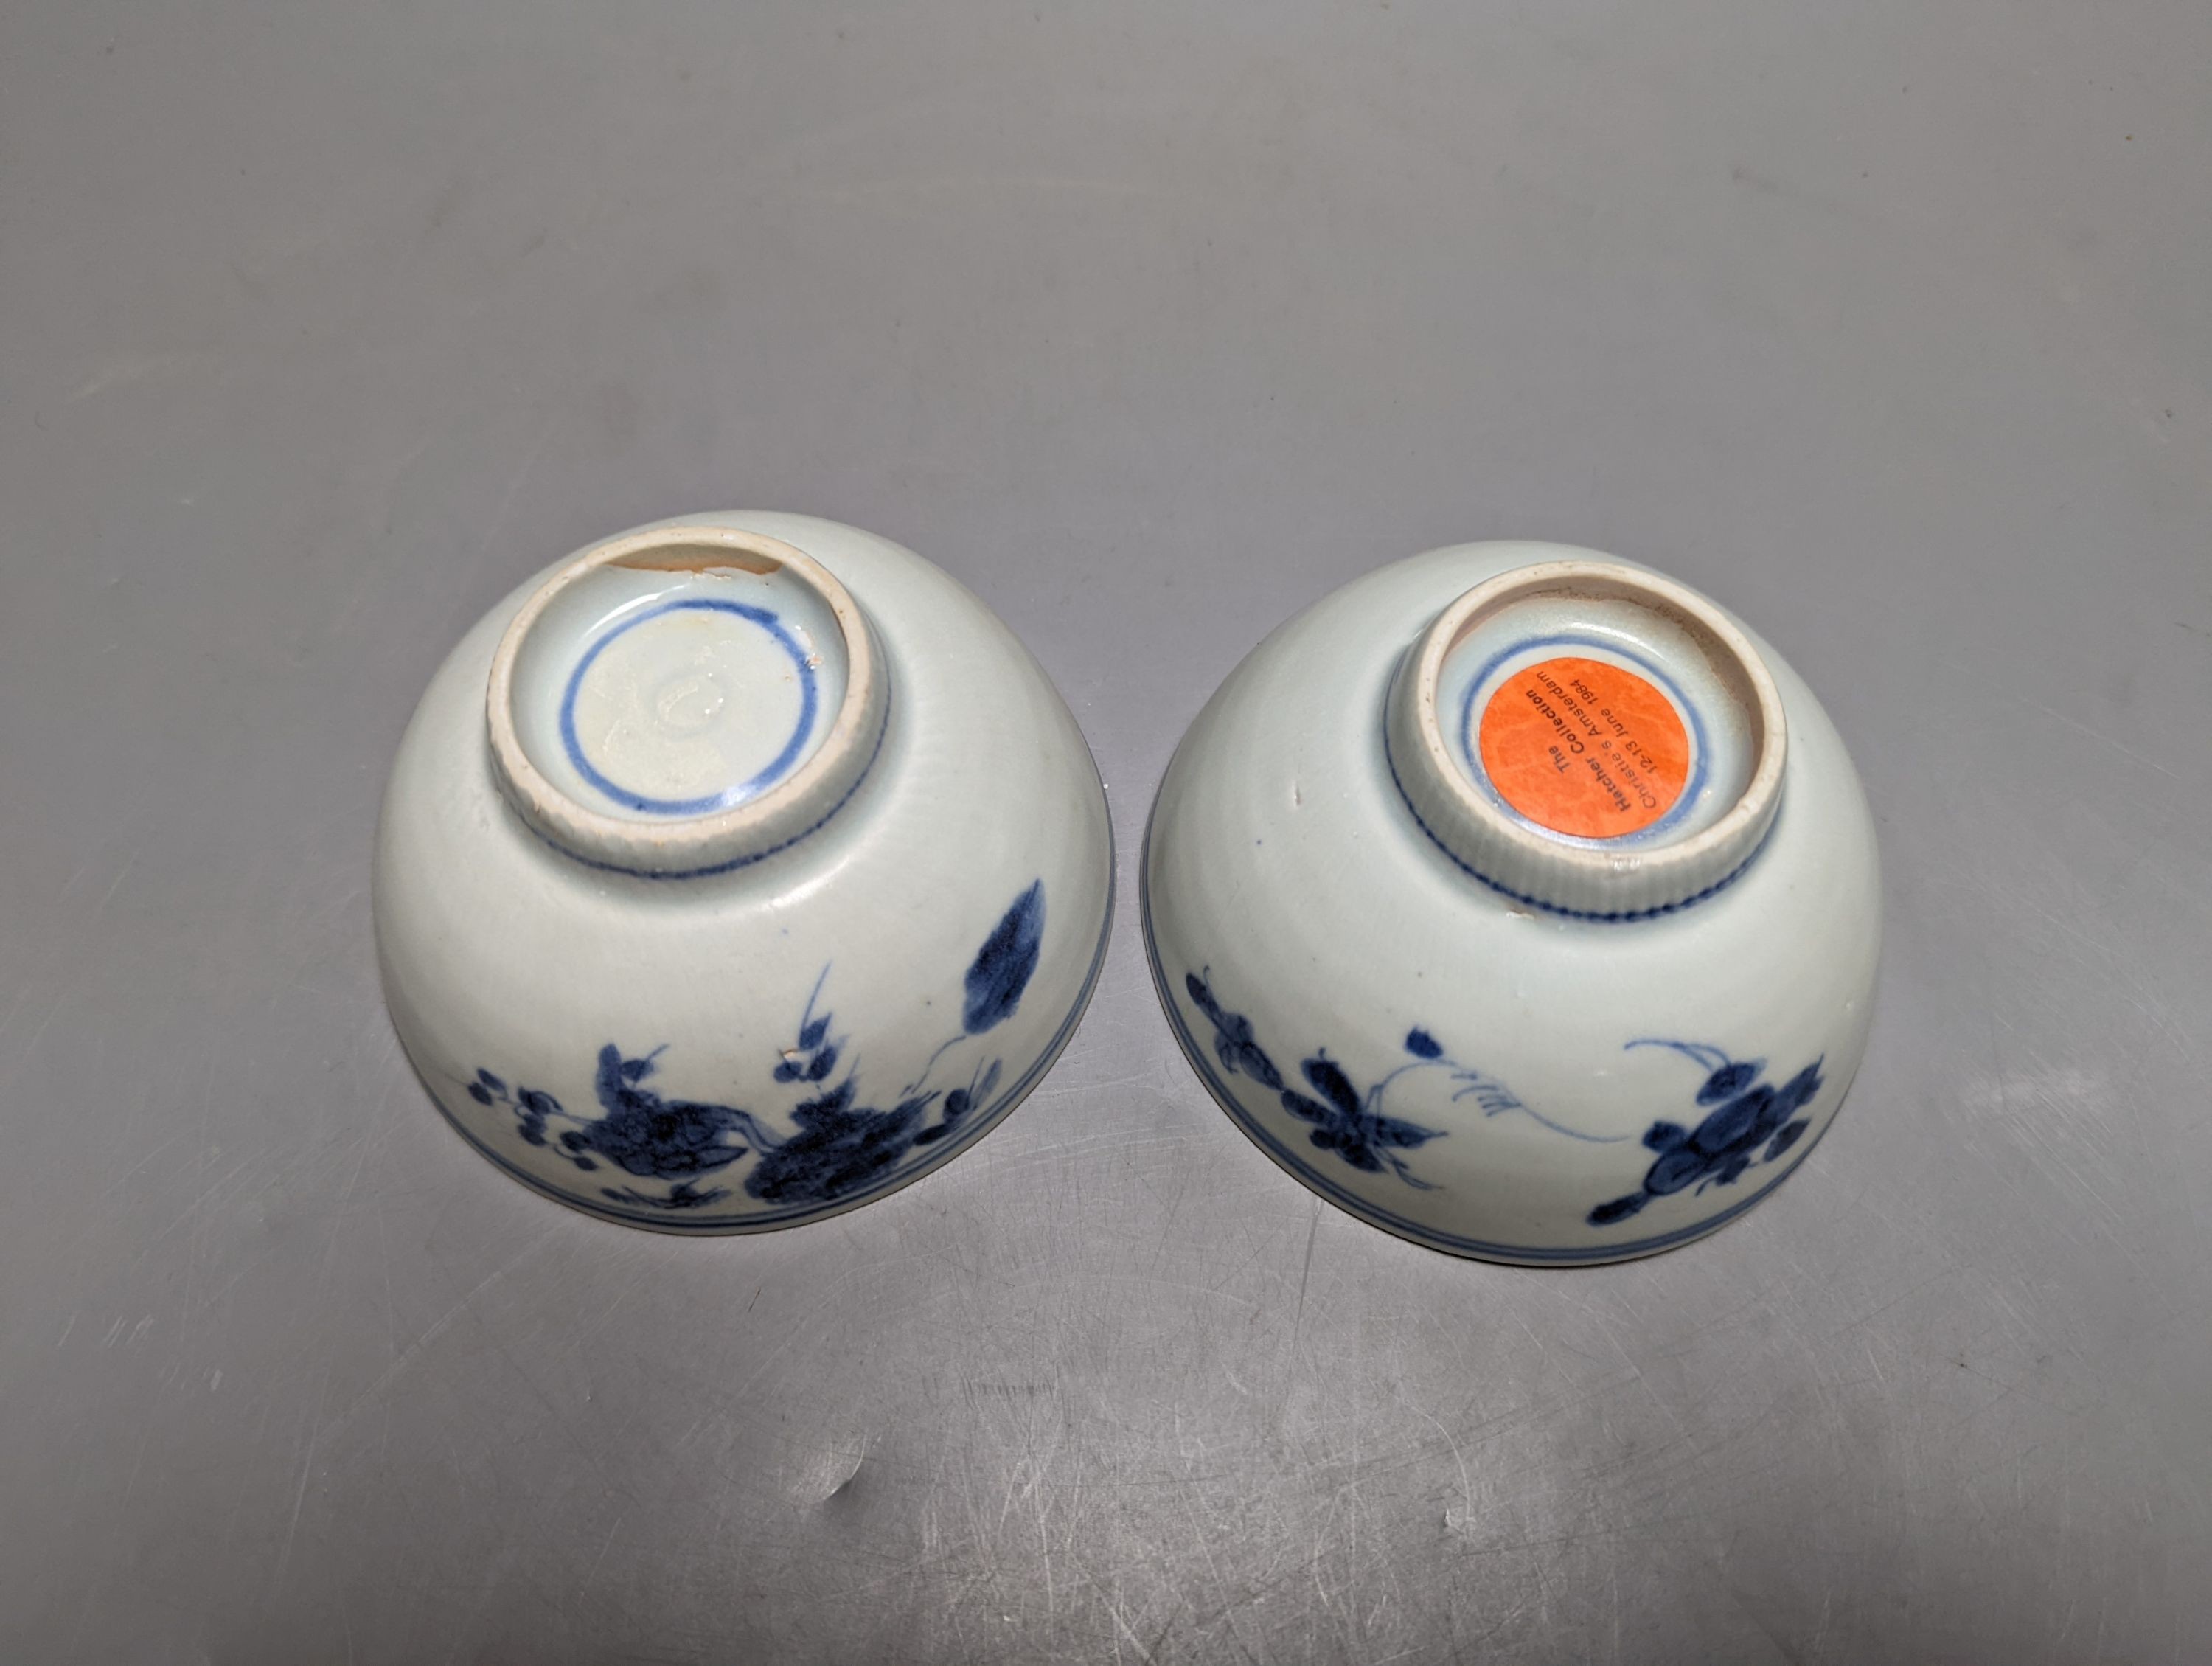 Two Chinese Ming dynasty provincial blue and white bowls (ex-Hatcher Collection, Christie’s)